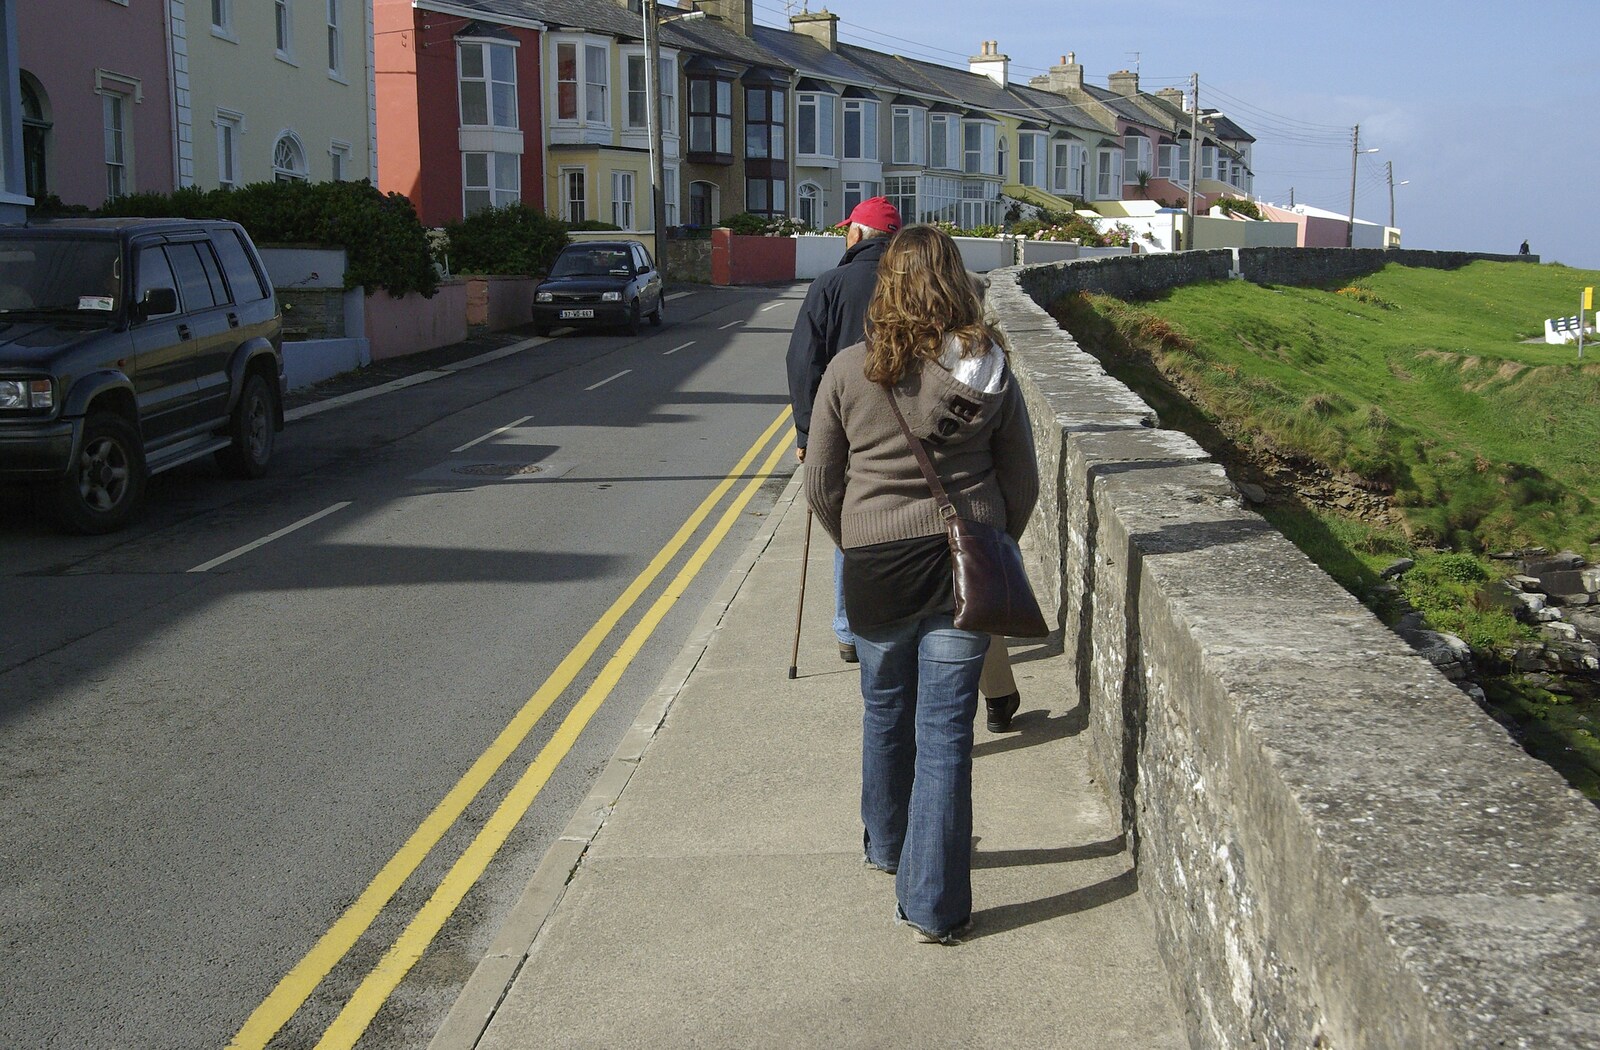 30th Birthday Party in Kilkee, County Clare, Ireland - 22nd September 2007: Walking the street by seafront houses